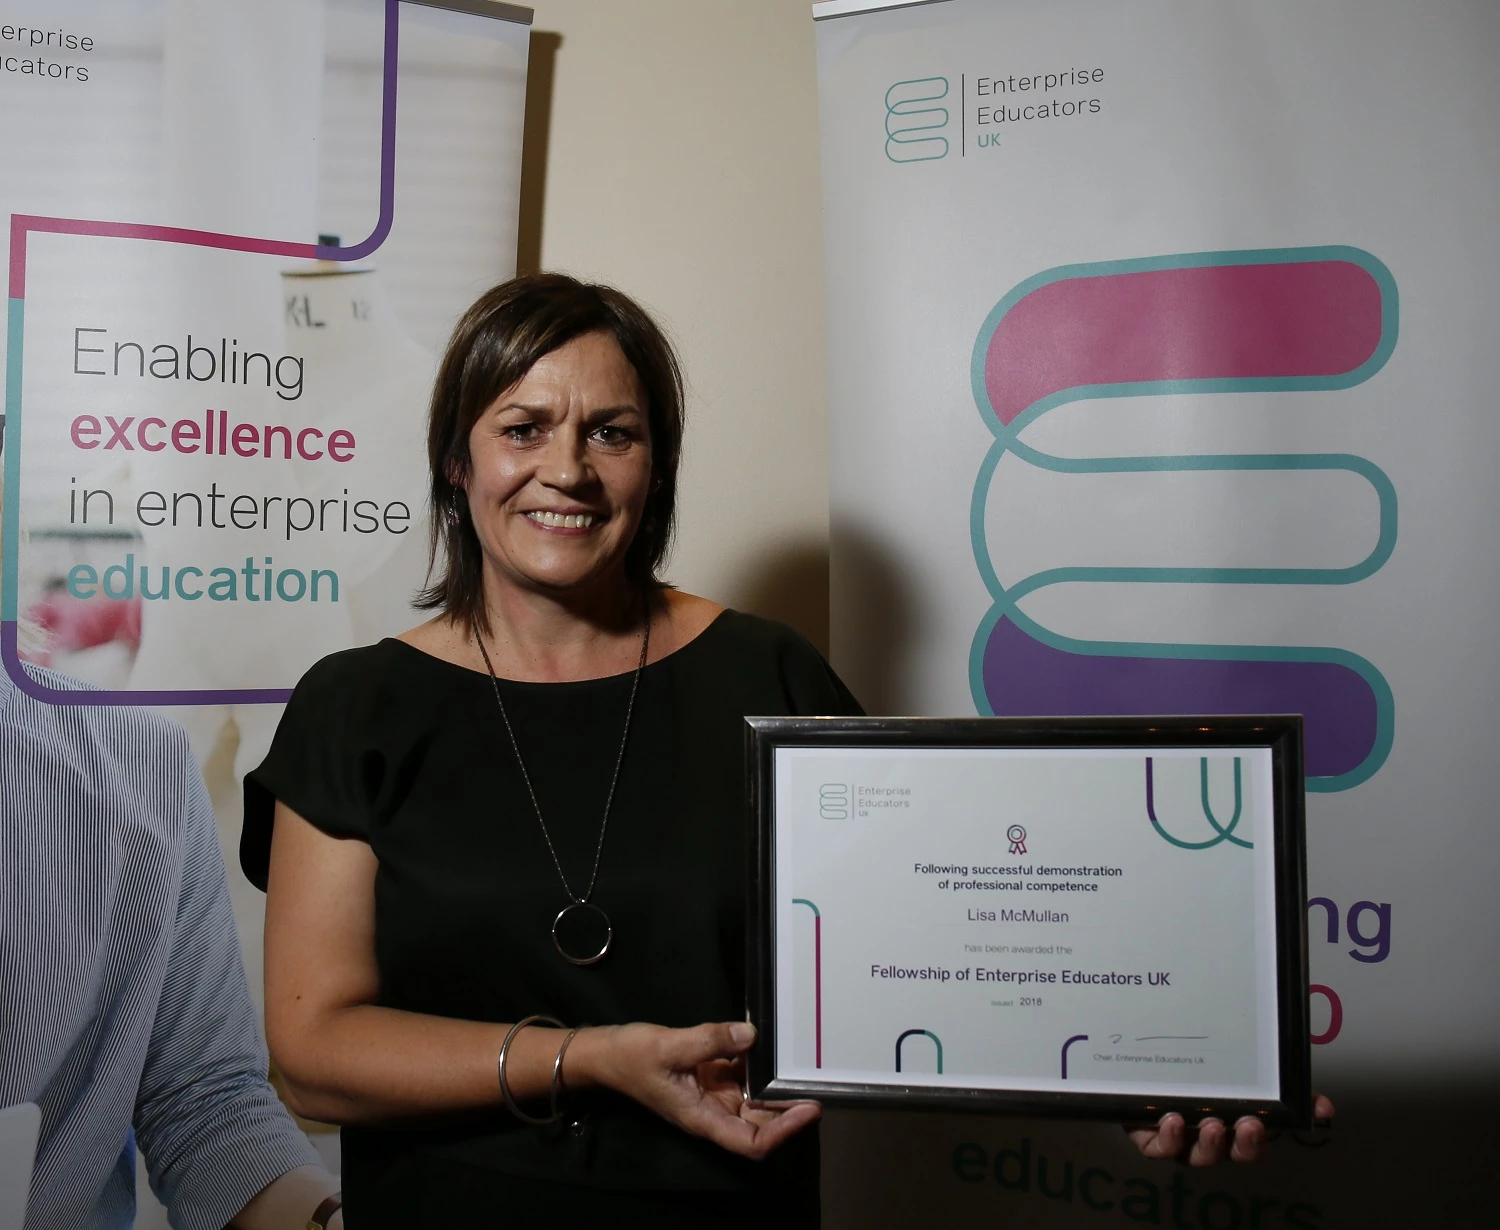 Lisa McMullan becomes a fellow of EEUK